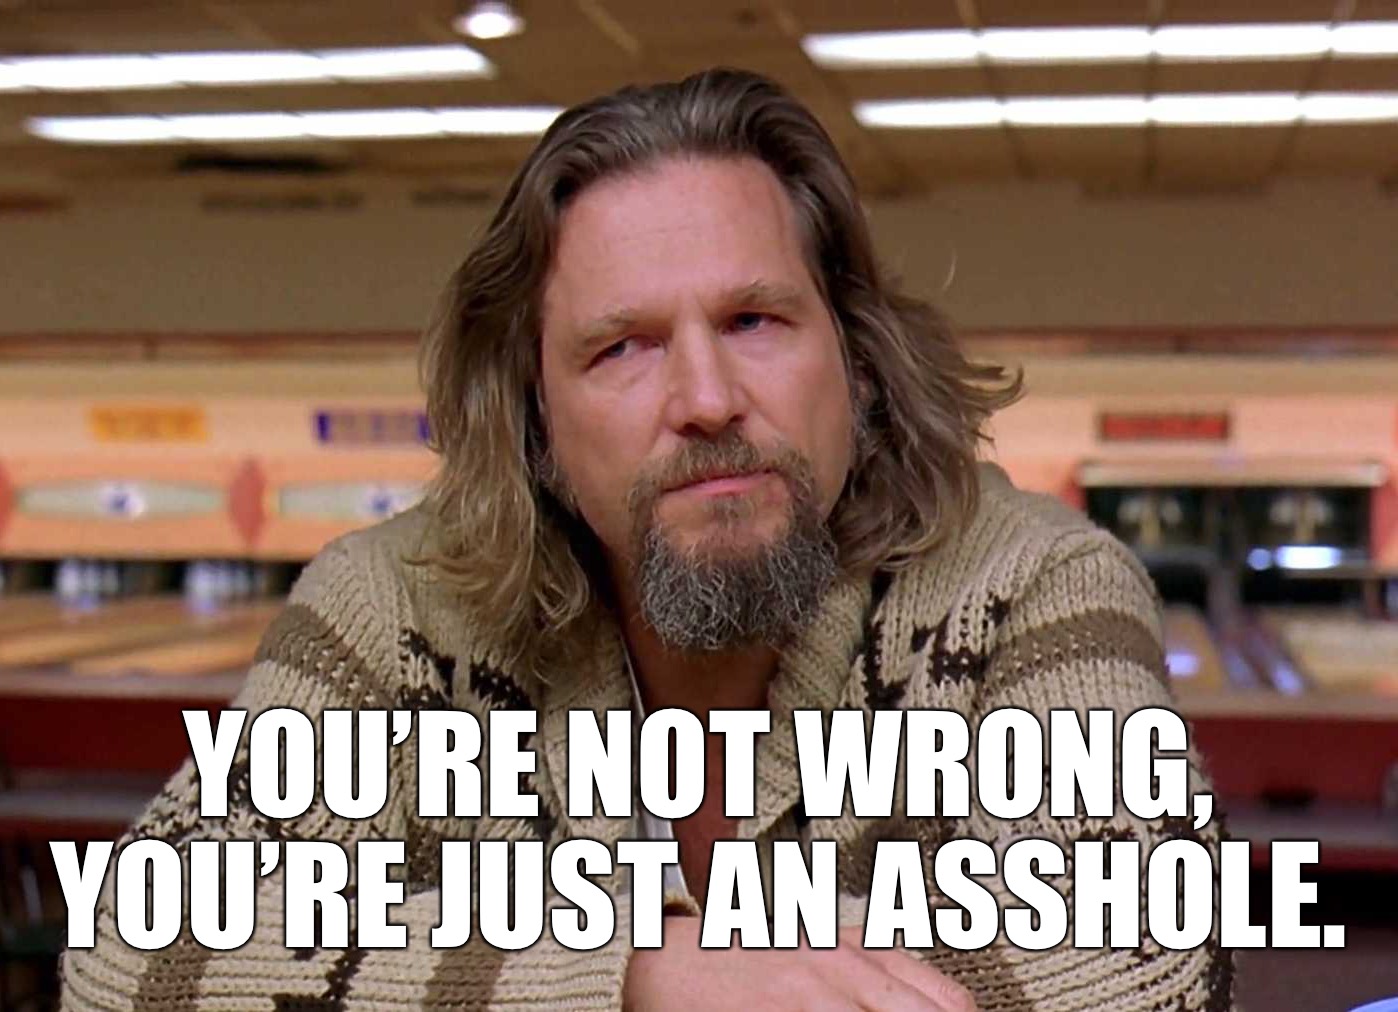 You're not wrong, you're just an asshole | YOU’RE NOT WRONG, YOU’RE JUST AN ASSHOLE. | image tagged in asshole,the dude,reaction,wrong | made w/ Imgflip meme maker